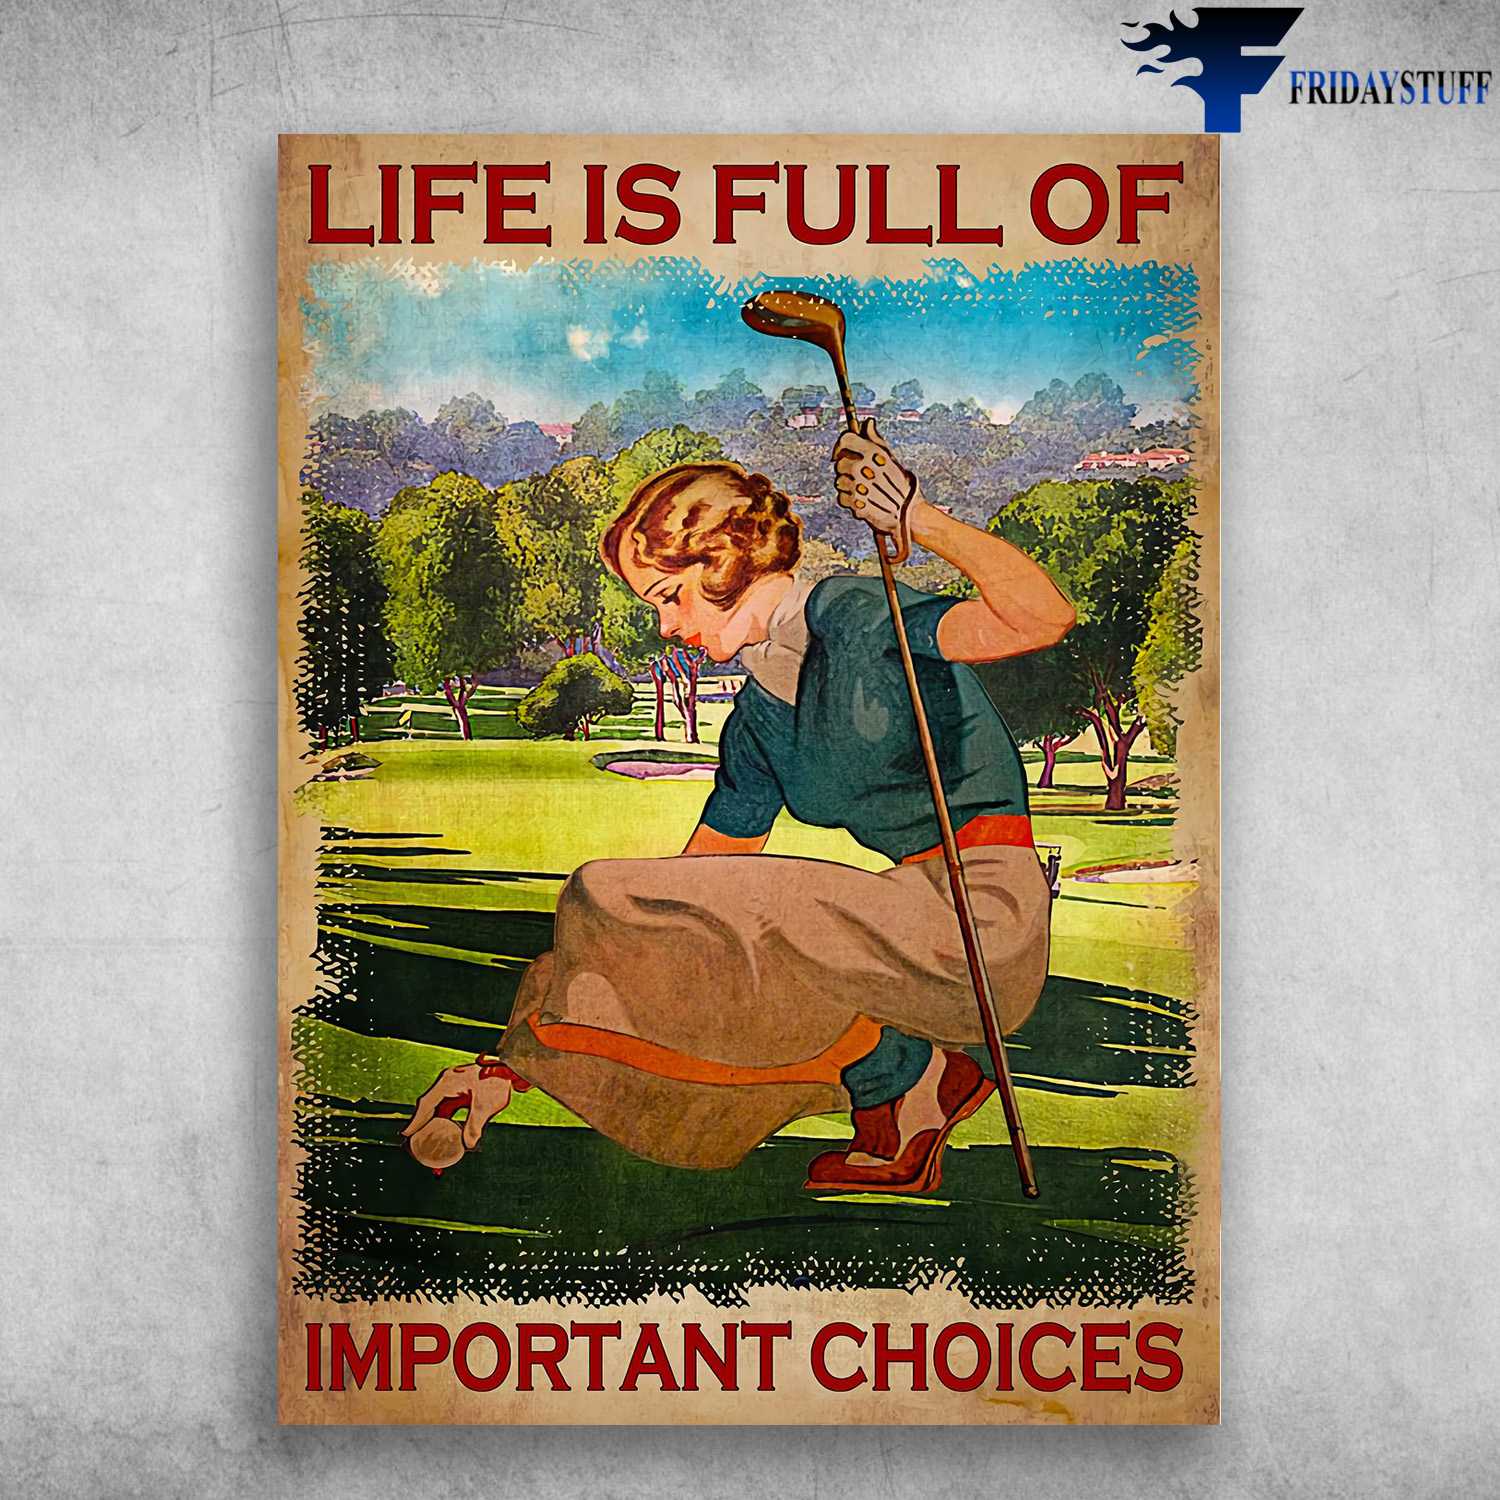 Girl Plays Golf, Golf Poster - Life Is Full Of, Important Choices